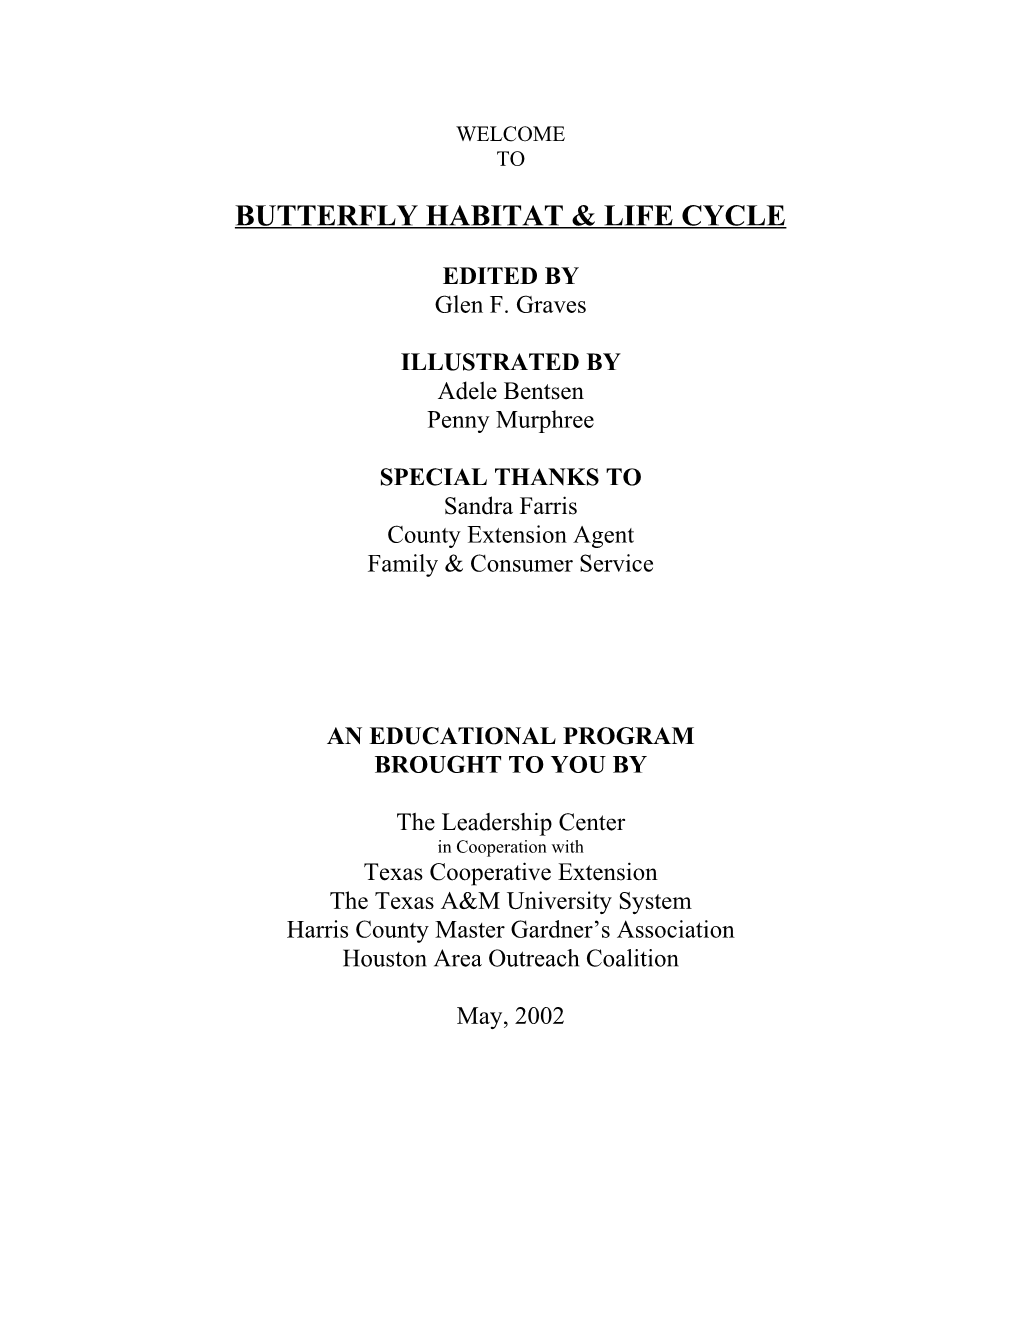 Butterfly Habitat & Life Cycle